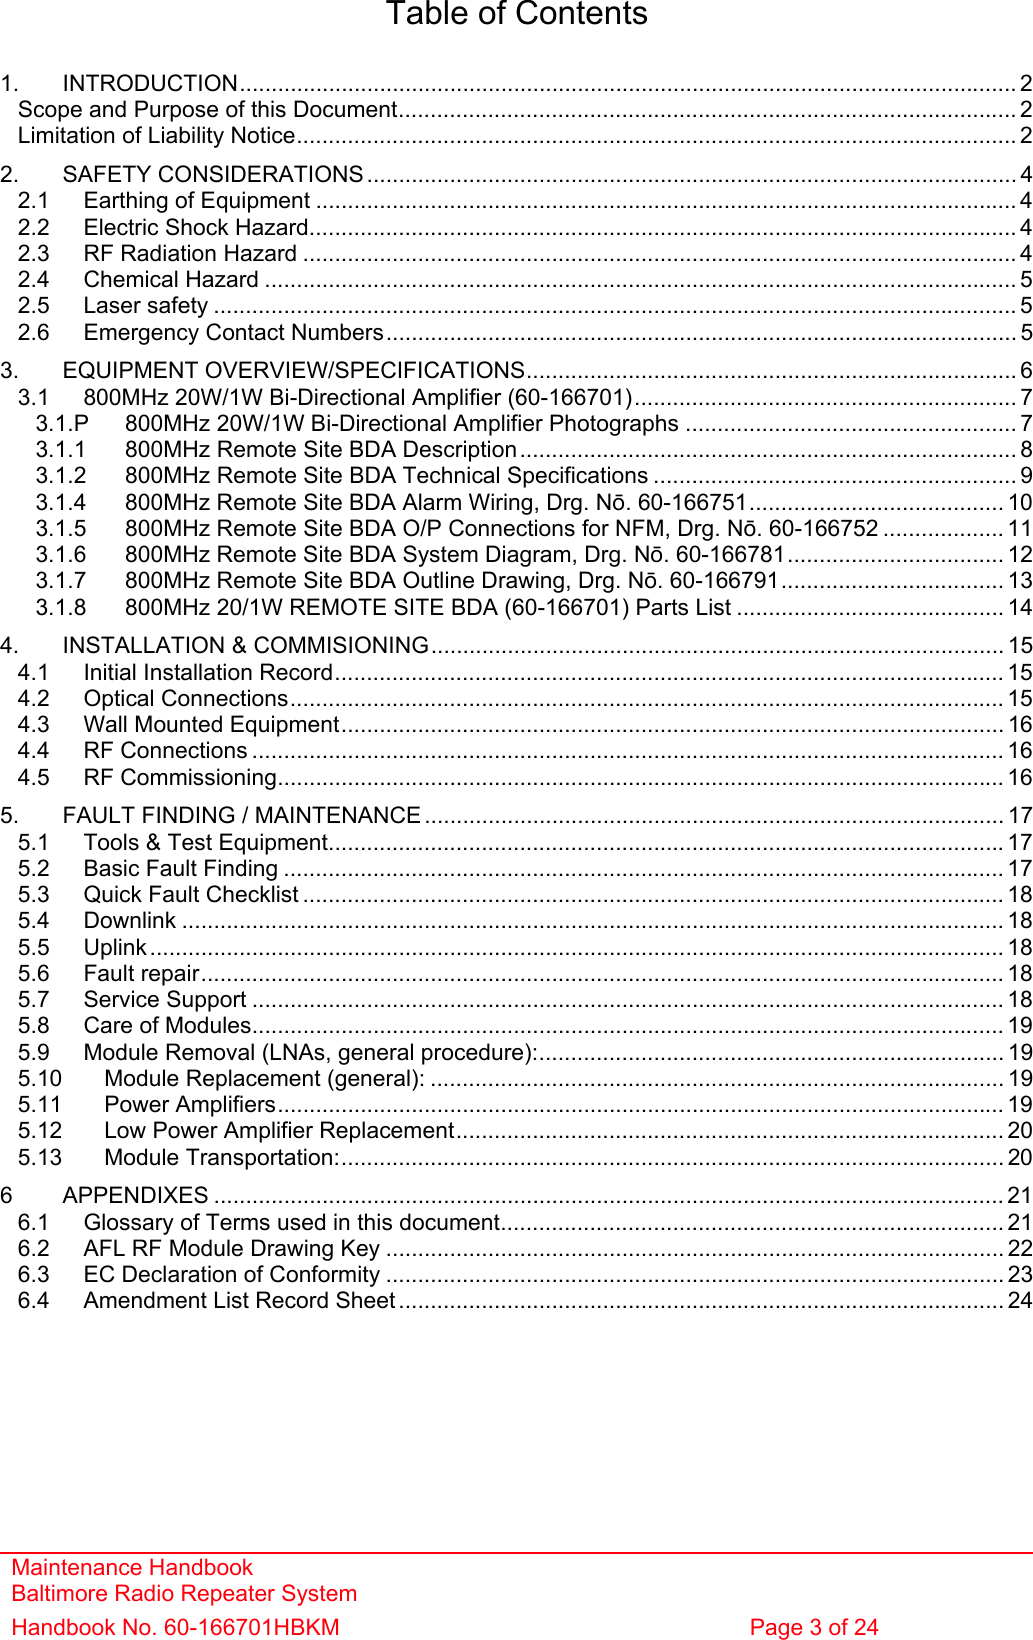 Maintenance Handbook Baltimore Radio Repeater System Handbook No. 60-166701HBKM  Page 3 of 24   Table of Contents  1. INTRODUCTION.......................................................................................................................... 2 Scope and Purpose of this Document................................................................................................. 2 Limitation of Liability Notice................................................................................................................. 2 2. SAFETY CONSIDERATIONS ...................................................................................................... 4 2.1 Earthing of Equipment .............................................................................................................. 4 2.2 Electric Shock Hazard............................................................................................................... 4 2.3 RF Radiation Hazard ................................................................................................................ 4 2.4 Chemical Hazard ...................................................................................................................... 5 2.5 Laser safety .............................................................................................................................. 5 2.6 Emergency Contact Numbers................................................................................................... 5 3. EQUIPMENT OVERVIEW/SPECIFICATIONS............................................................................. 6 3.1 800MHz 20W/1W Bi-Directional Amplifier (60-166701)............................................................ 7 3.1.P 800MHz 20W/1W Bi-Directional Amplifier Photographs .................................................... 7 3.1.1 800MHz Remote Site BDA Description.............................................................................. 8 3.1.2 800MHz Remote Site BDA Technical Specifications ......................................................... 9 3.1.4 800MHz Remote Site BDA Alarm Wiring, Drg. Nō. 60-166751........................................ 10 3.1.5 800MHz Remote Site BDA O/P Connections for NFM, Drg. Nō. 60-166752 ................... 11 3.1.6 800MHz Remote Site BDA System Diagram, Drg. Nō. 60-166781.................................. 12 3.1.7 800MHz Remote Site BDA Outline Drawing, Drg. Nō. 60-166791................................... 13 3.1.8 800MHz 20/1W REMOTE SITE BDA (60-166701) Parts List .......................................... 14 4. INSTALLATION &amp; COMMISIONING.......................................................................................... 15 4.1 Initial Installation Record......................................................................................................... 15 4.2 Optical Connections................................................................................................................ 15 4.3 Wall Mounted Equipment........................................................................................................ 16 4.4 RF Connections ...................................................................................................................... 16 4.5 RF Commissioning.................................................................................................................. 16 5. FAULT FINDING / MAINTENANCE ........................................................................................... 17 5.1 Tools &amp; Test Equipment..........................................................................................................17 5.2 Basic Fault Finding ................................................................................................................. 17 5.3 Quick Fault Checklist .............................................................................................................. 18 5.4 Downlink ................................................................................................................................. 18 5.5 Uplink...................................................................................................................................... 18 5.6 Fault repair.............................................................................................................................. 18 5.7 Service Support ...................................................................................................................... 18 5.8 Care of Modules...................................................................................................................... 19 5.9 Module Removal (LNAs, general procedure):......................................................................... 19 5.10 Module Replacement (general): .......................................................................................... 19 5.11 Power Amplifiers.................................................................................................................. 19 5.12 Low Power Amplifier Replacement...................................................................................... 20 5.13 Module Transportation:........................................................................................................ 20 6 APPENDIXES ............................................................................................................................ 21 6.1 Glossary of Terms used in this document............................................................................... 21 6.2 AFL RF Module Drawing Key ................................................................................................. 22 6.3 EC Declaration of Conformity ................................................................................................. 23 6.4 Amendment List Record Sheet ............................................................................................... 24  